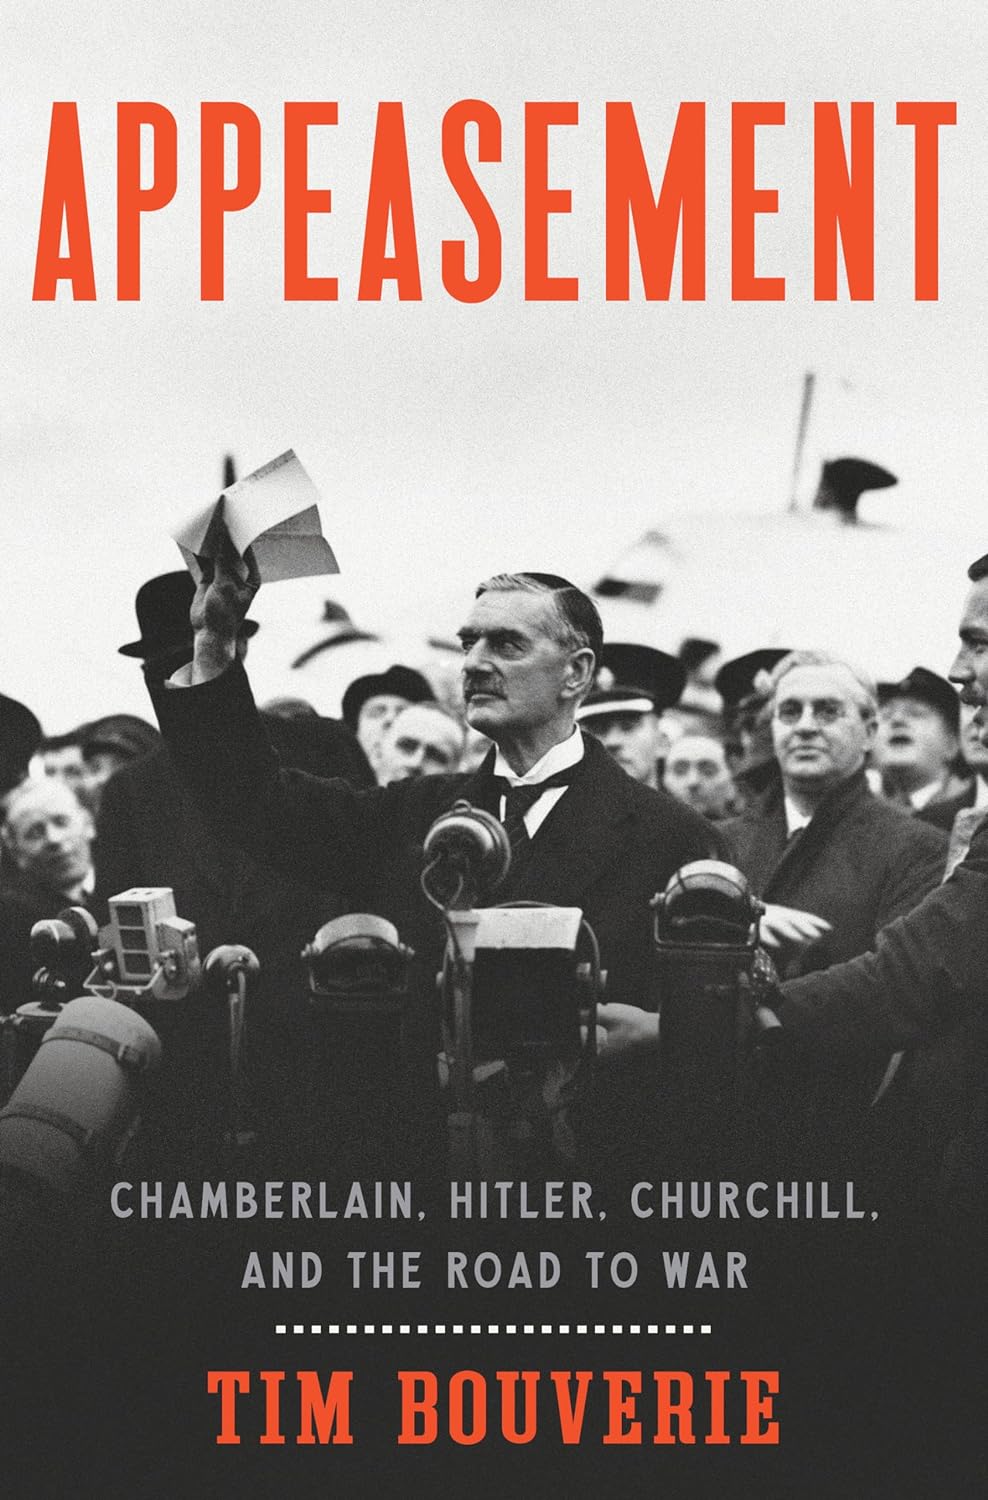 Appeasement Chamberlain, Hitler, Churchill, and the Road to War by Tim Bouverie